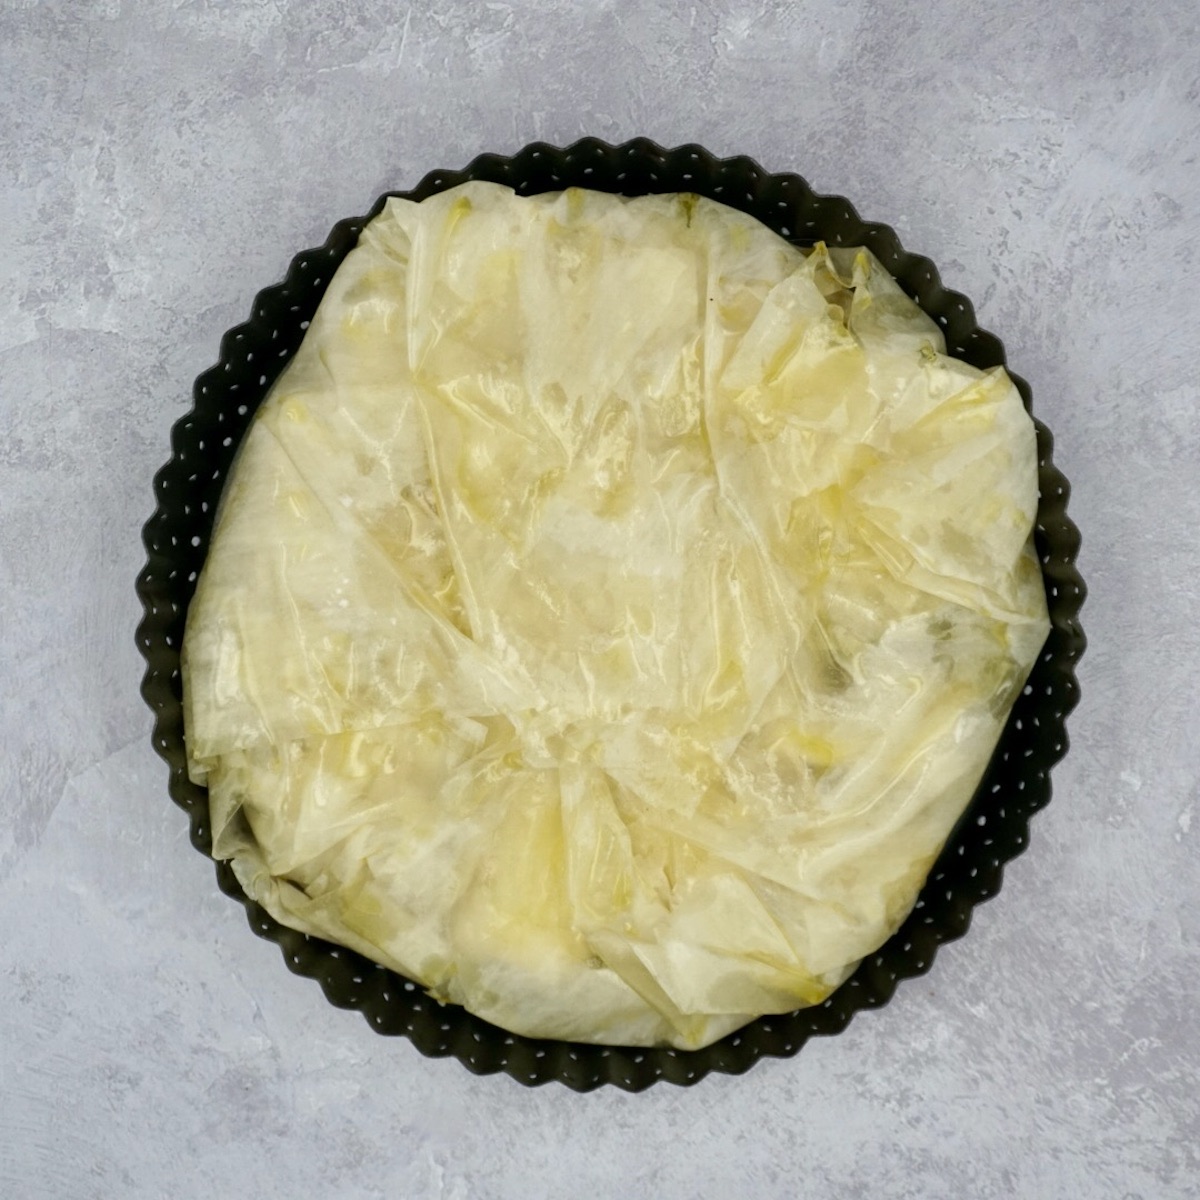 An unbaked filled filo pastry parcel.